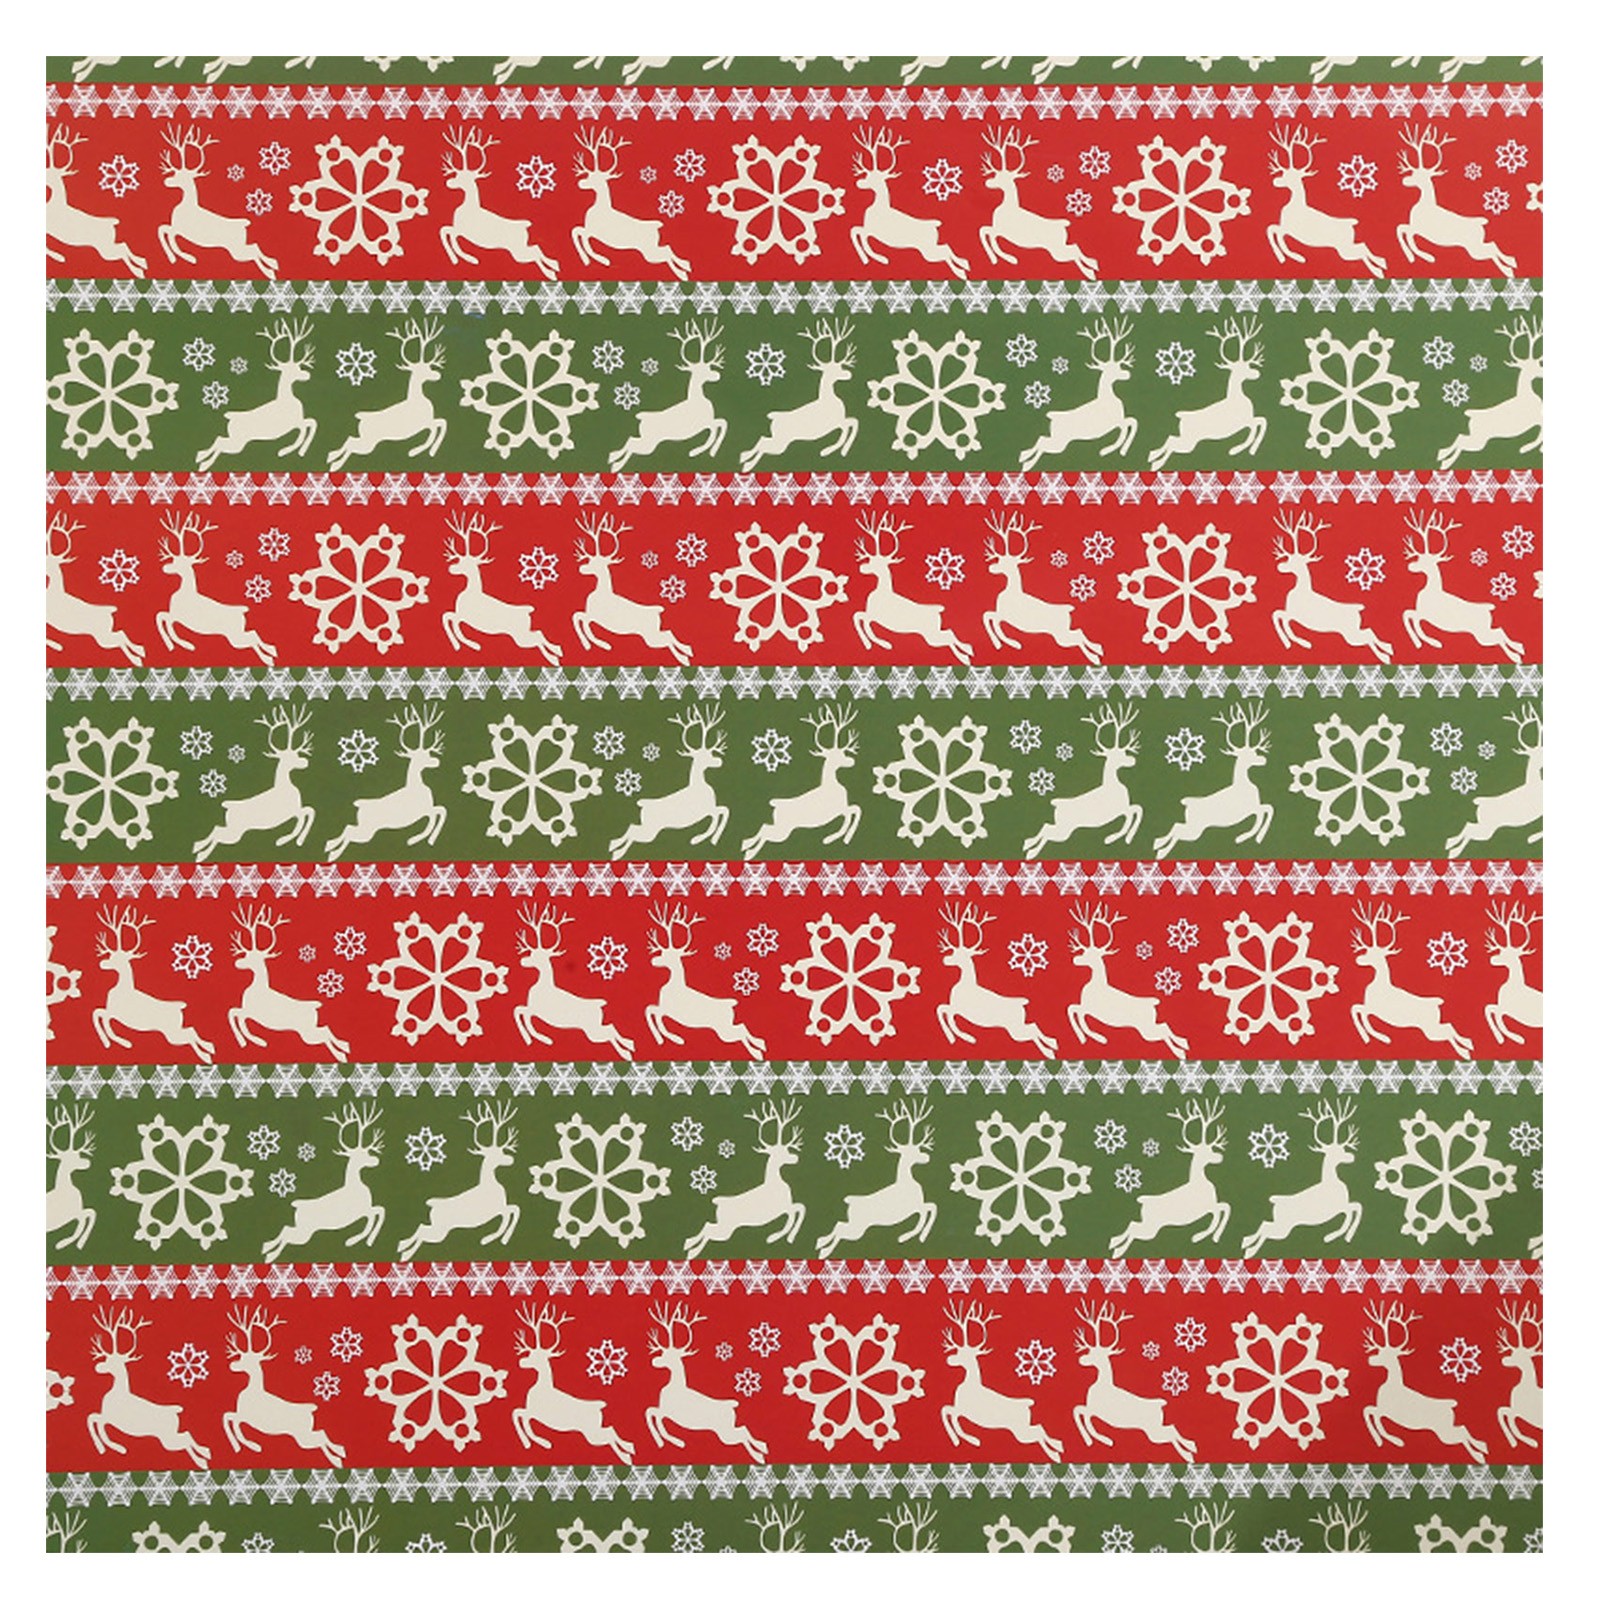 2DXuixsh Wrapping Paper 1Pc Diy Men's Women's Children's Christmas Wrapping  Paper Holiday Gifts Wrapping Truck Plaid Snowflake Green Tree Christmas